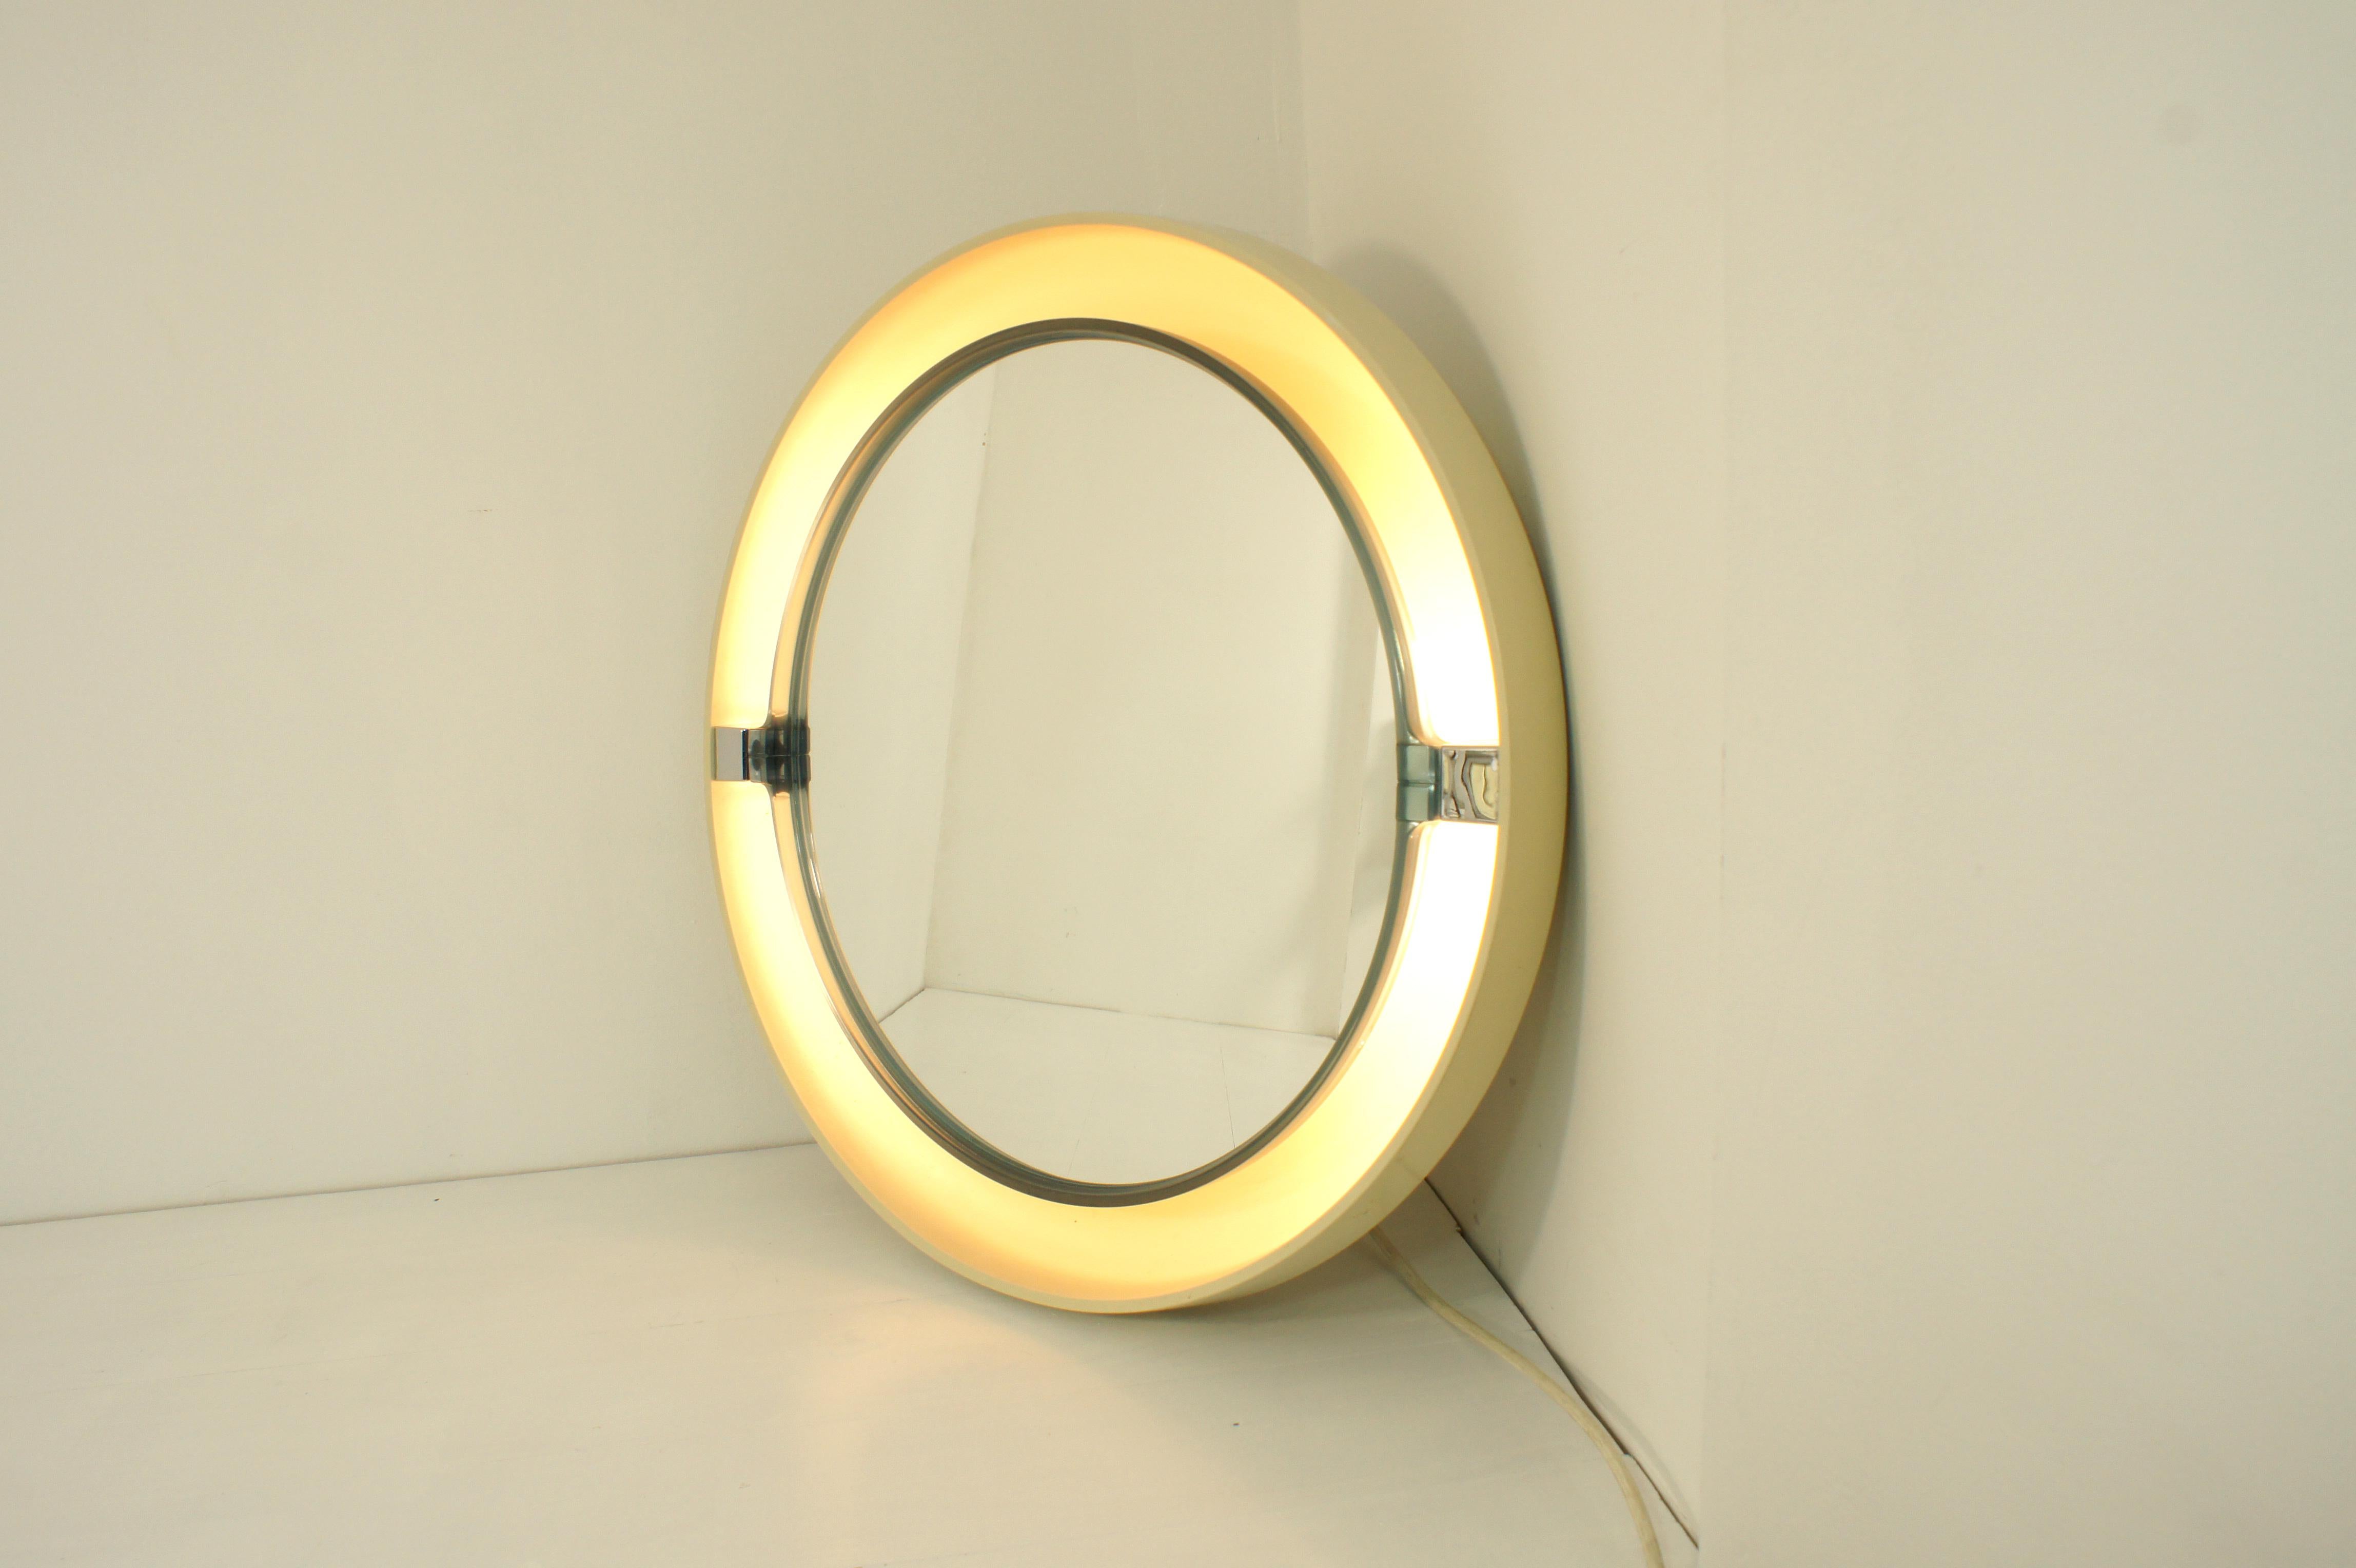 Tilting and backlit mirror produced in the 1970s by Allibert, germany.

White abs shell on which is mounted a tilting semi-transparent blue frame in which the mirror is included.

Four E14 pitch bulbs find their place between the mirror and